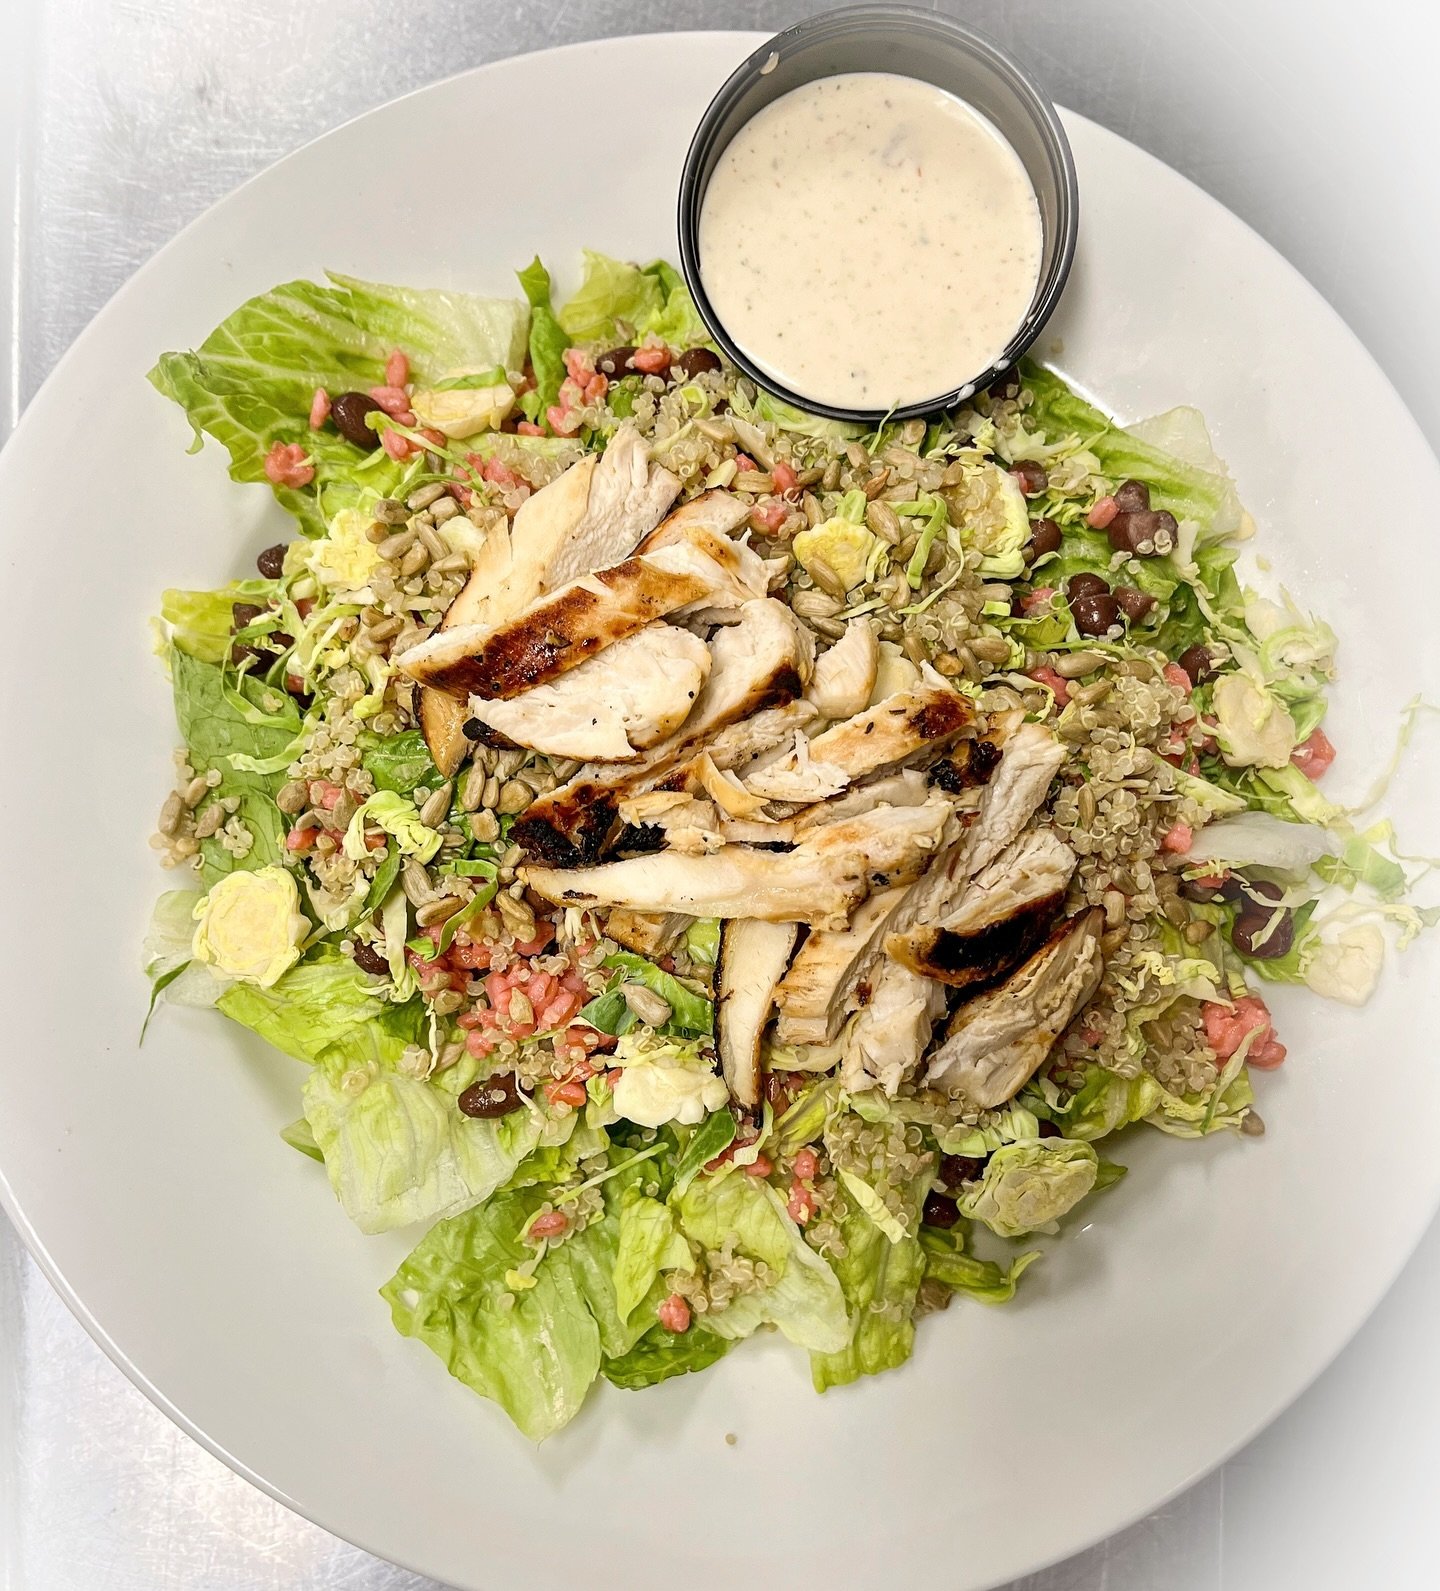 .
🥗 SALAD SPECIAL 🥗
&mdash;Romaine lettuce, hibiscus farro, quinoa, black beans, shaved Brussels, toasted sunflower seeds, and topped with grilled chicken. Served with a side of chipotle Feta Ranch. 😍😍

#saladspecial #quinoa #pawleysisland #quigl